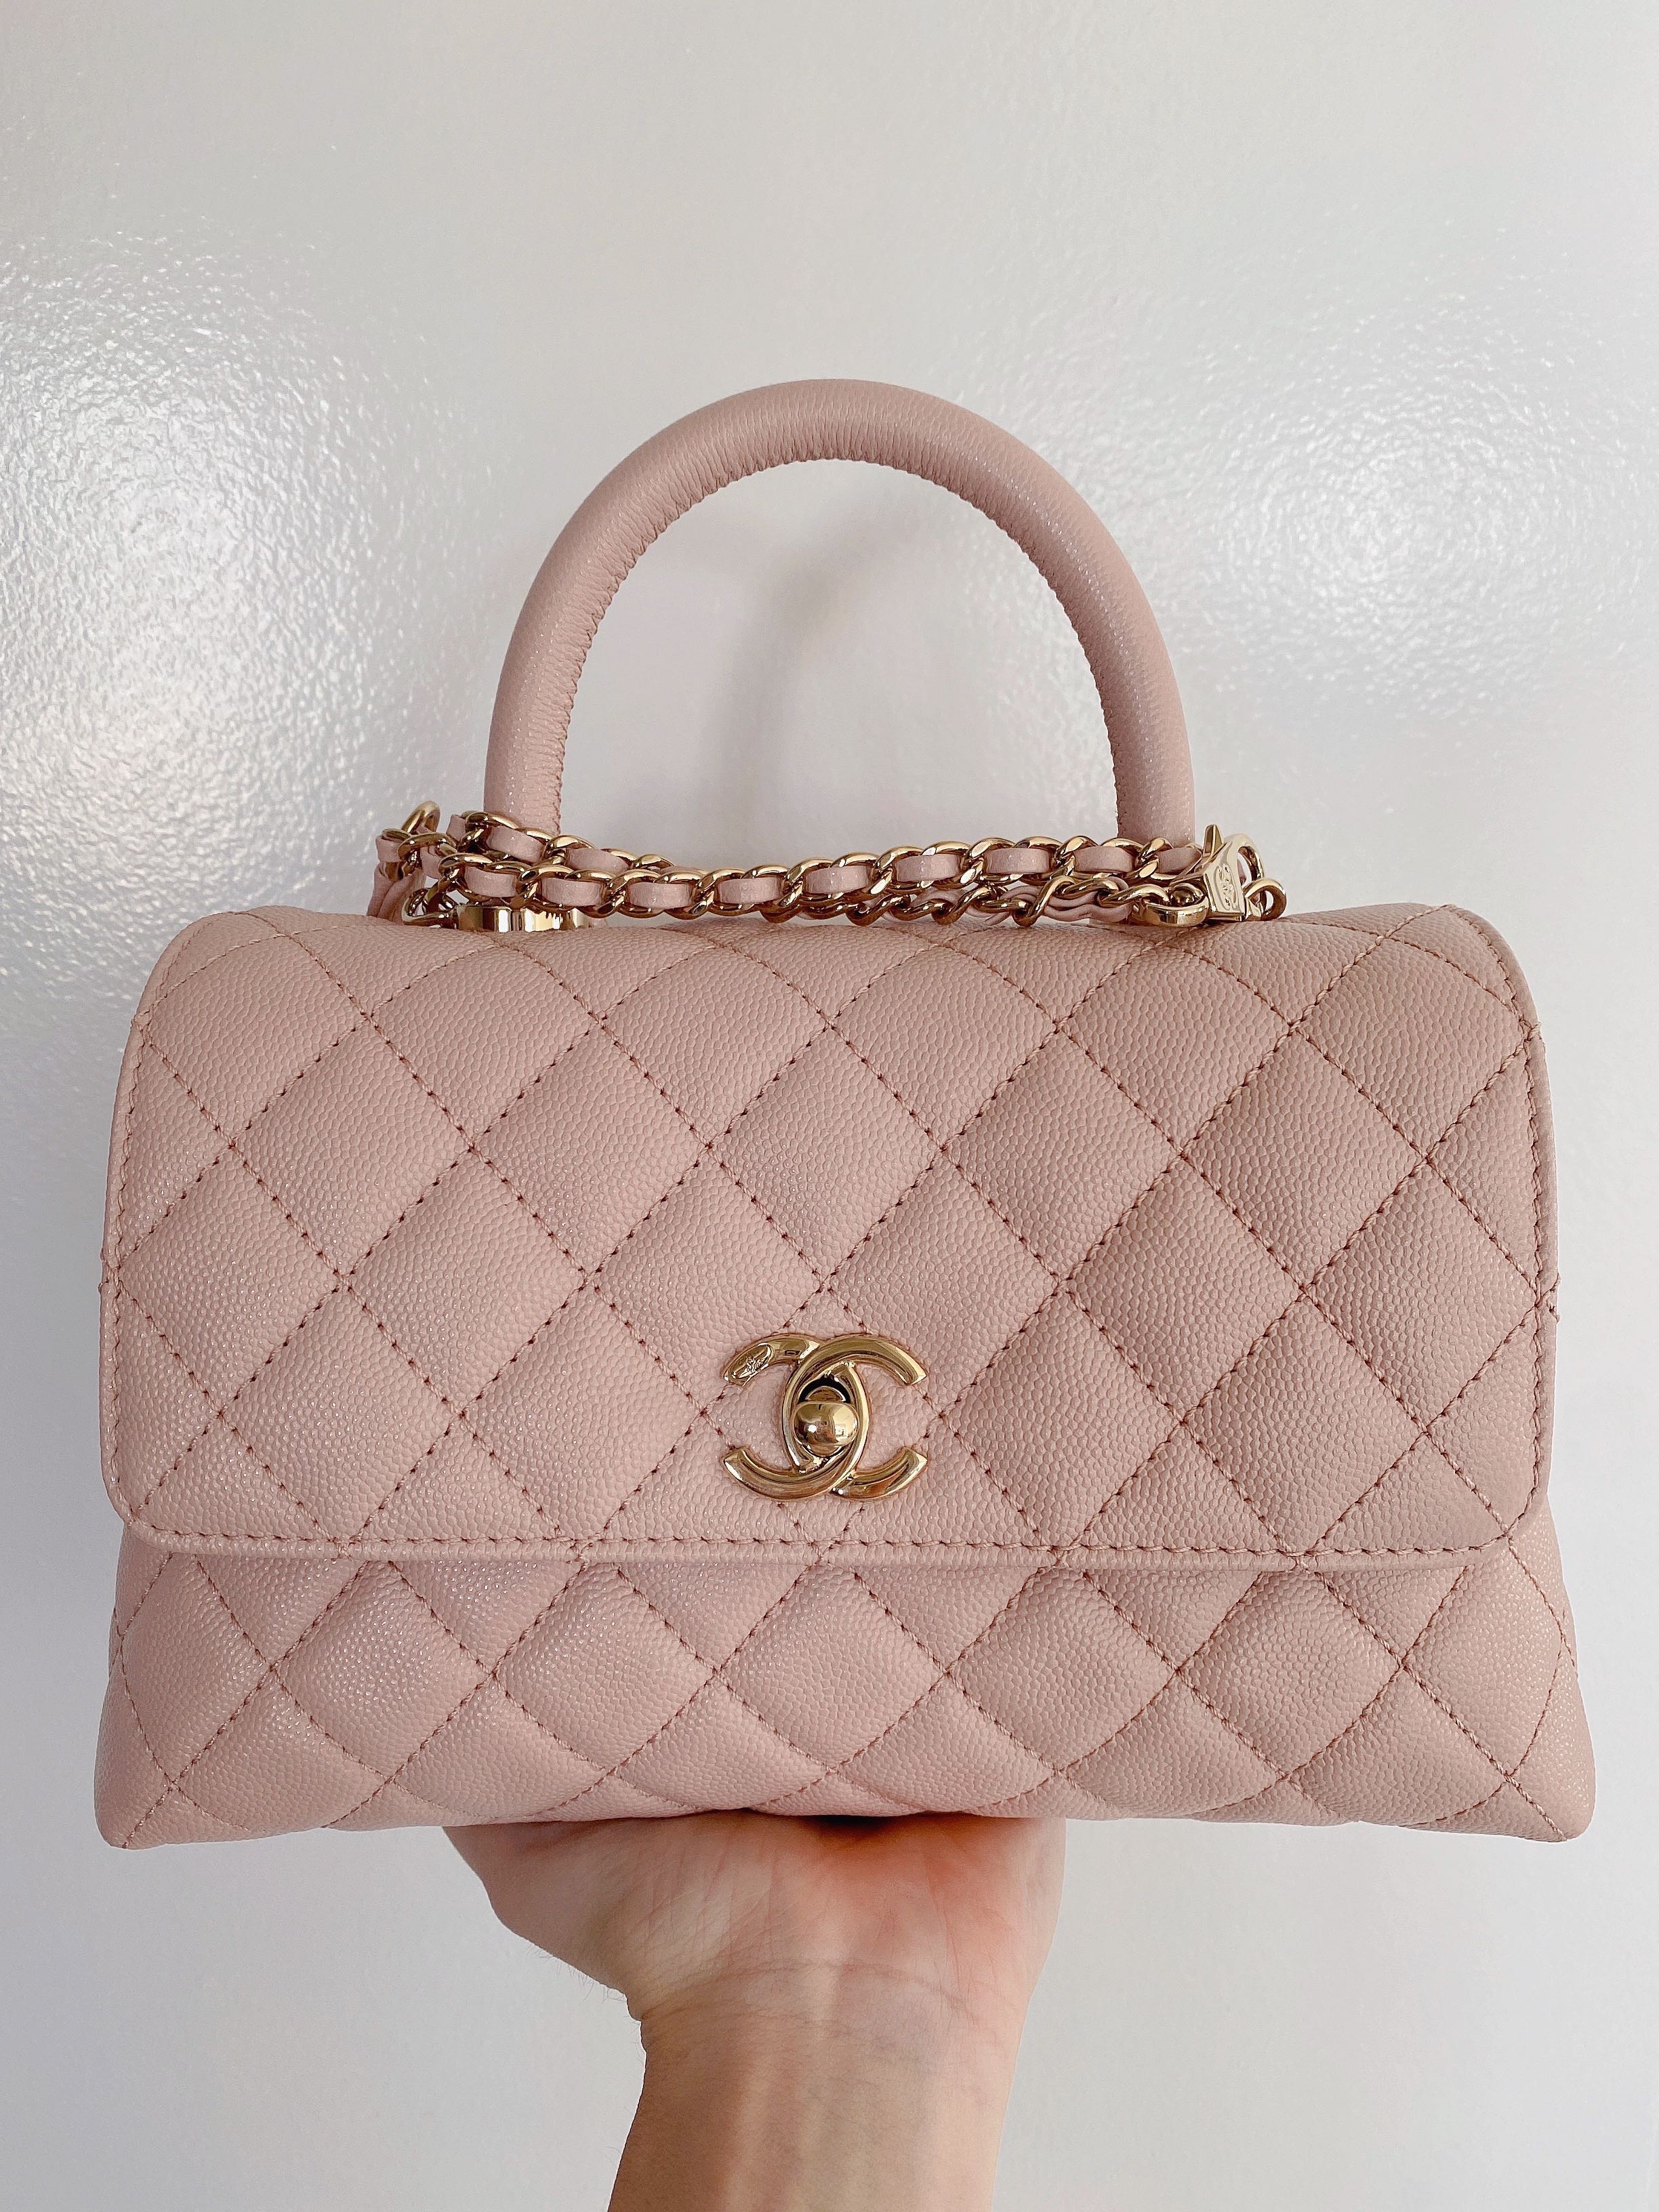 Chanel Small Coco Handle in 21A Rose Clair, Women's Fashion, Bags